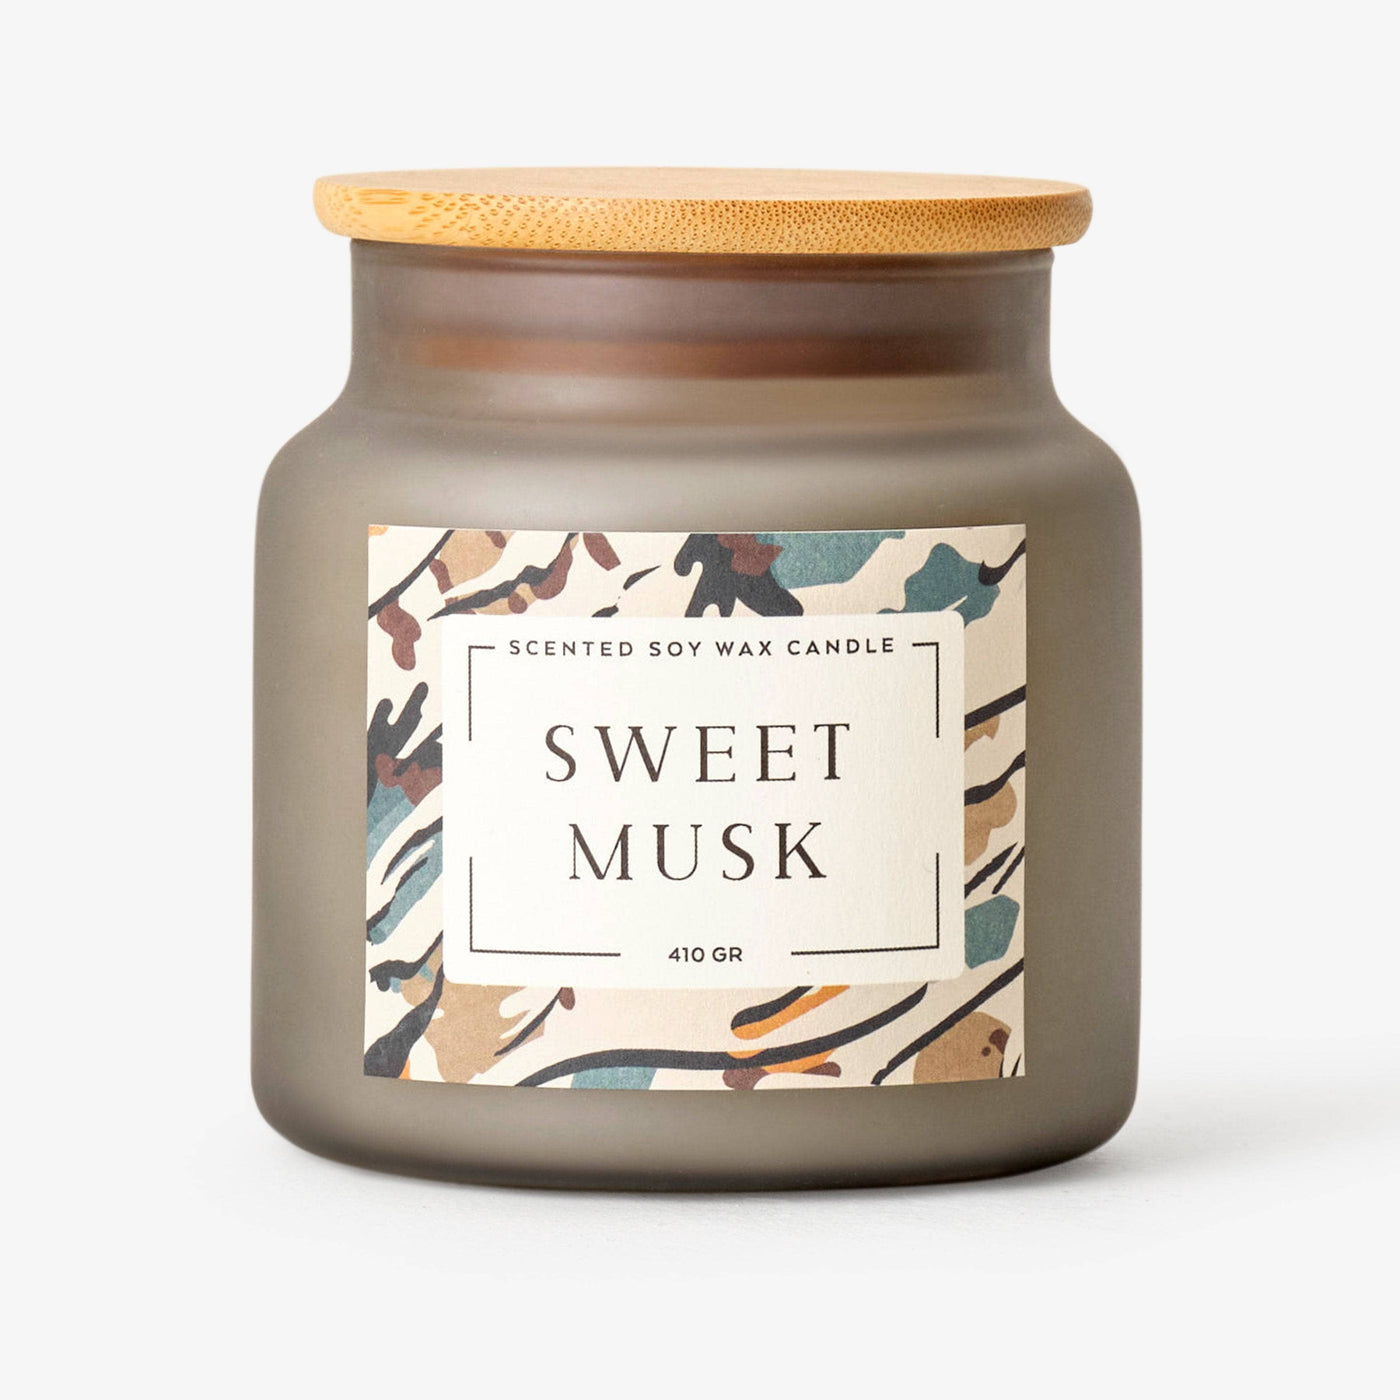 Sweet Musk Candle, Charcoal, 410 g Candles sazy.com